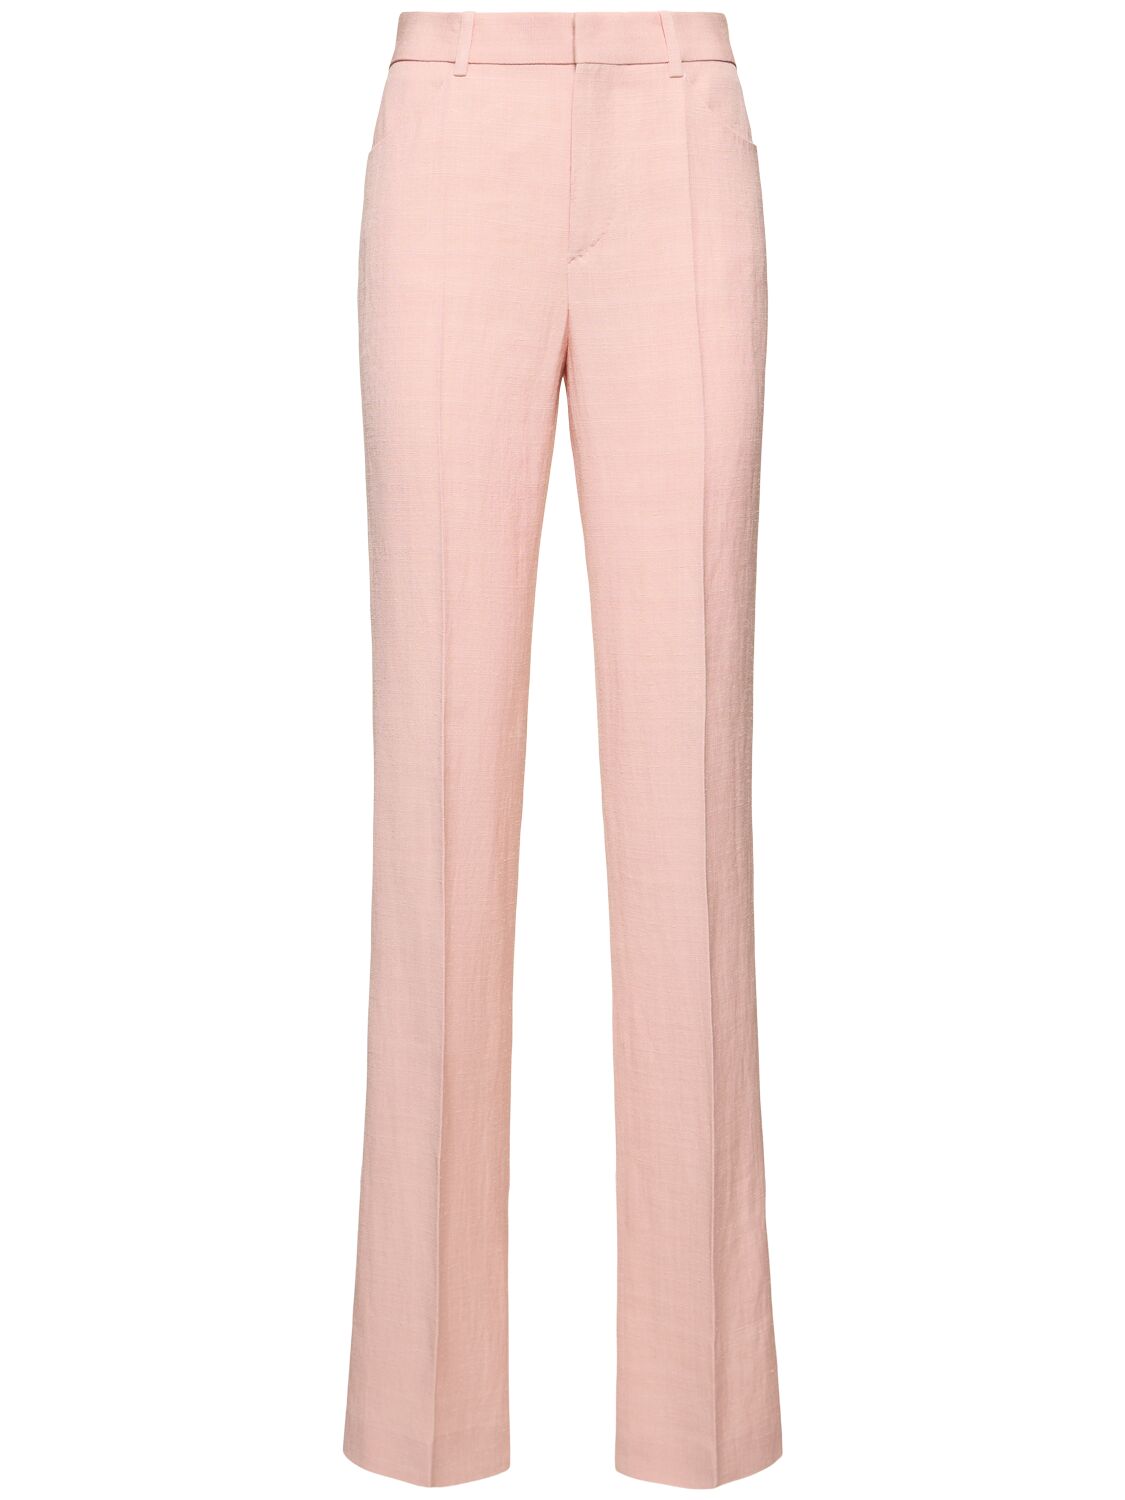 Image of Mid-rise Straight Leg Tailored Pants